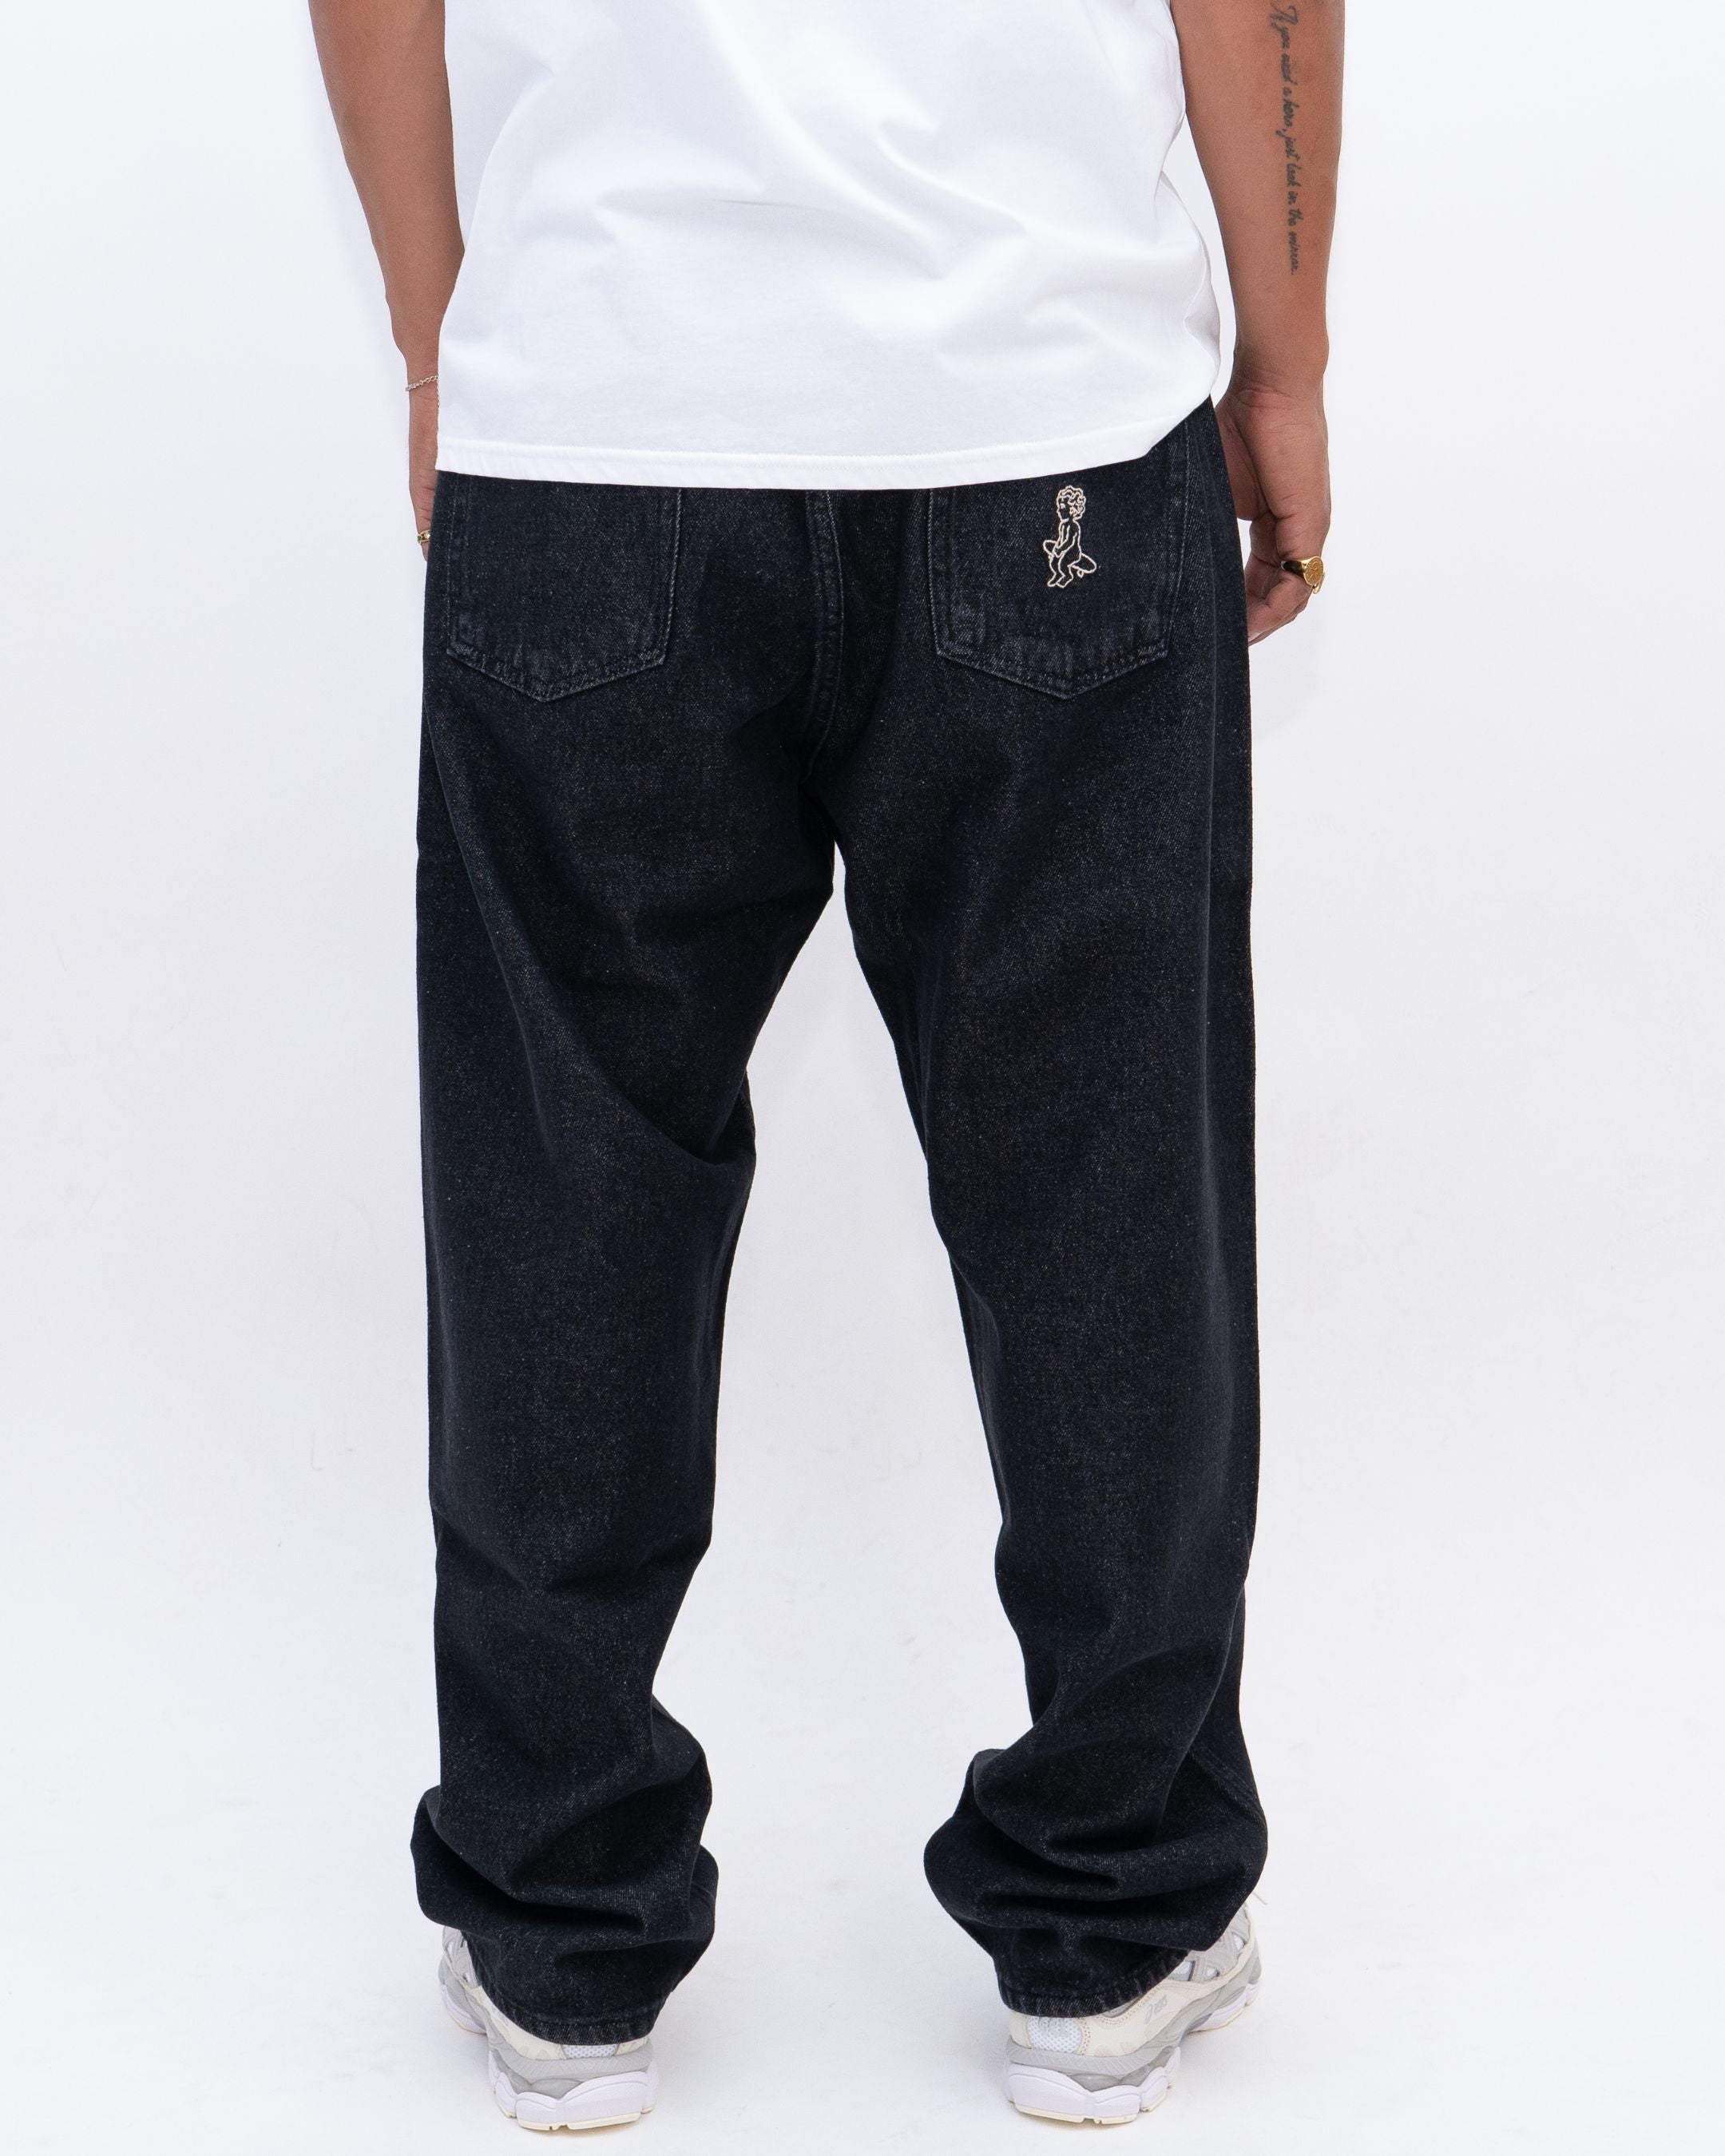 Ikon Jeans Relaxed Fit Pants